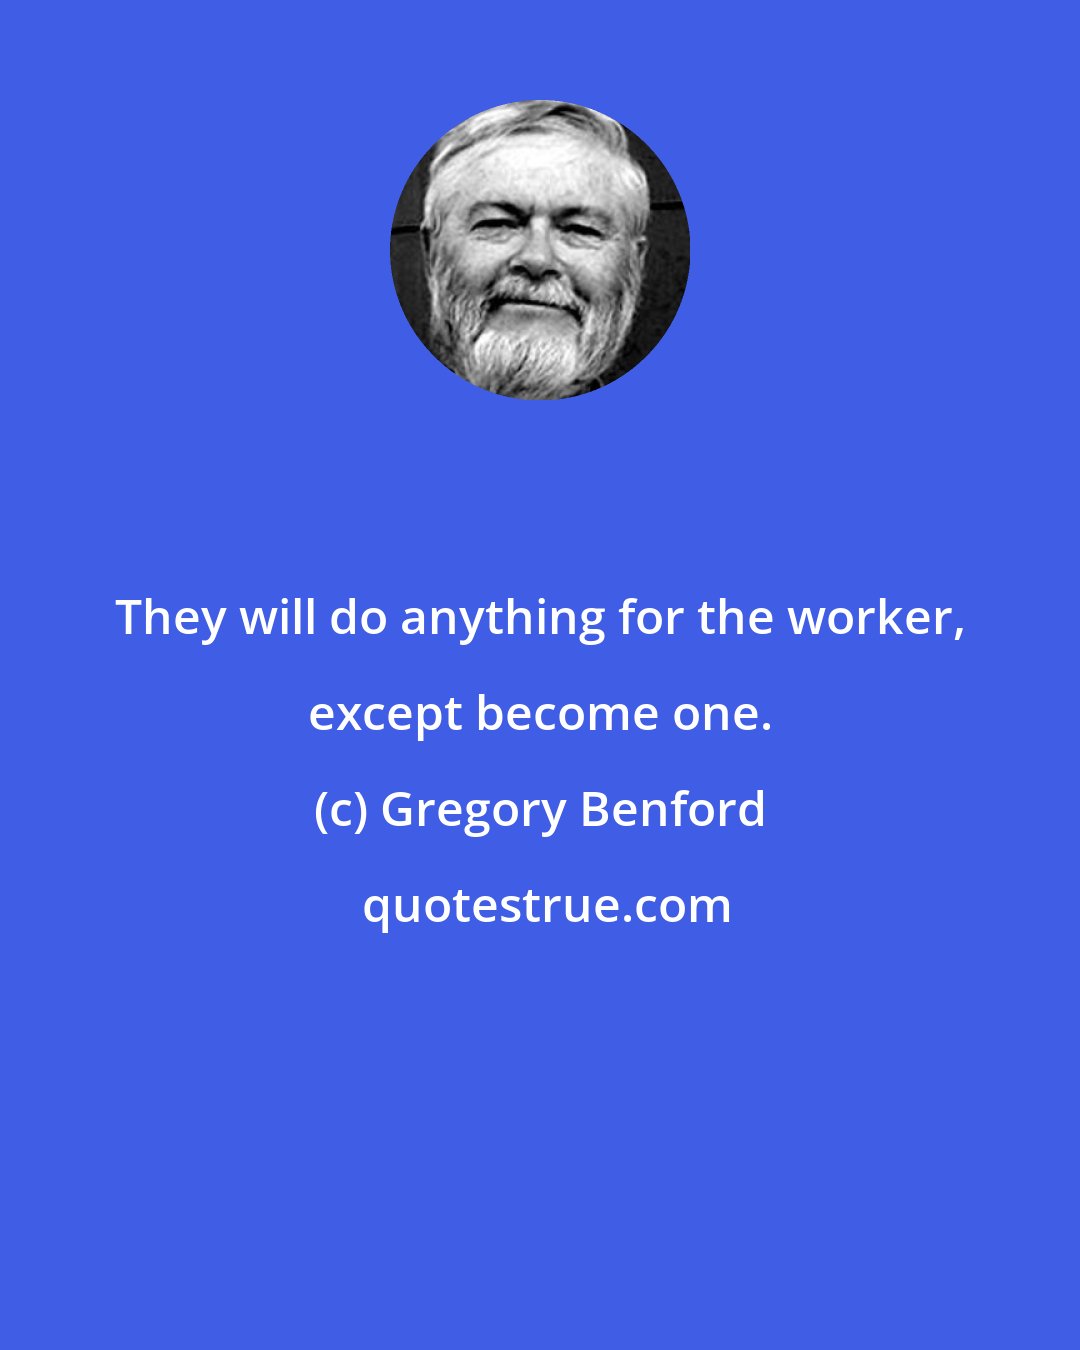 Gregory Benford: They will do anything for the worker, except become one.